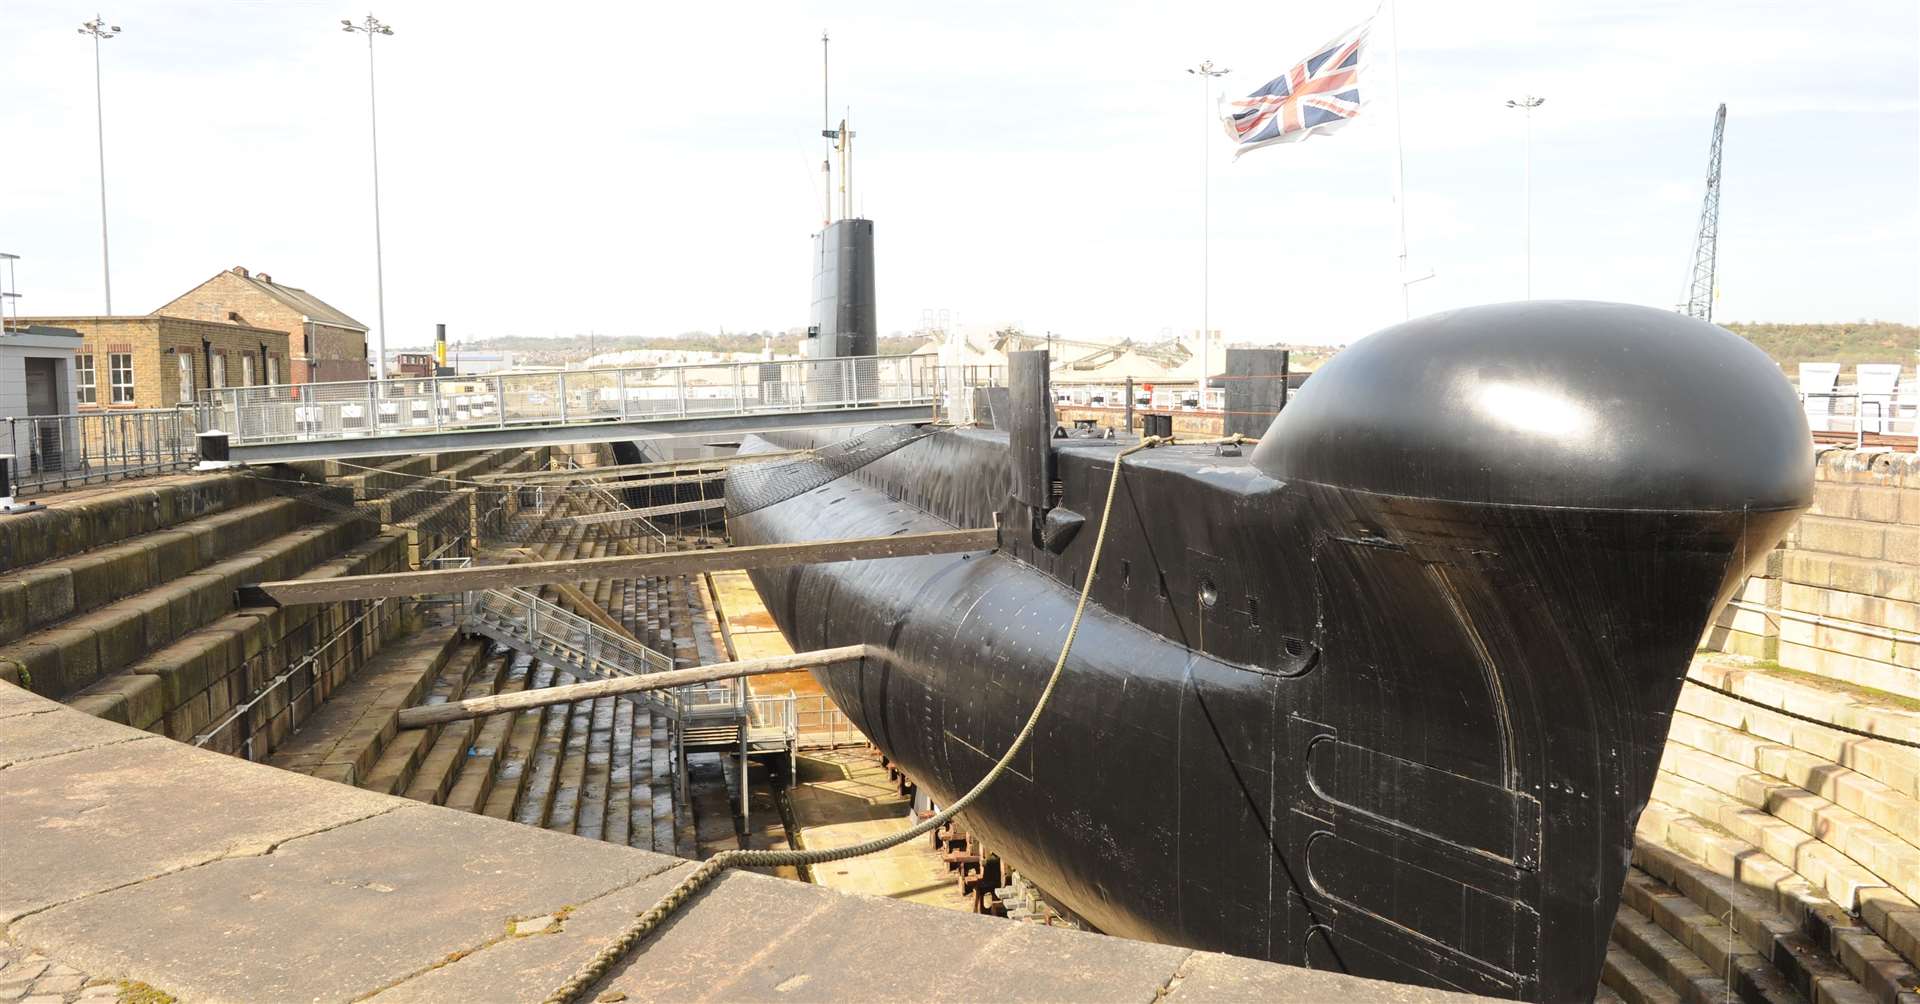 The HMS Ocelot submarine opened to visitors in 1995